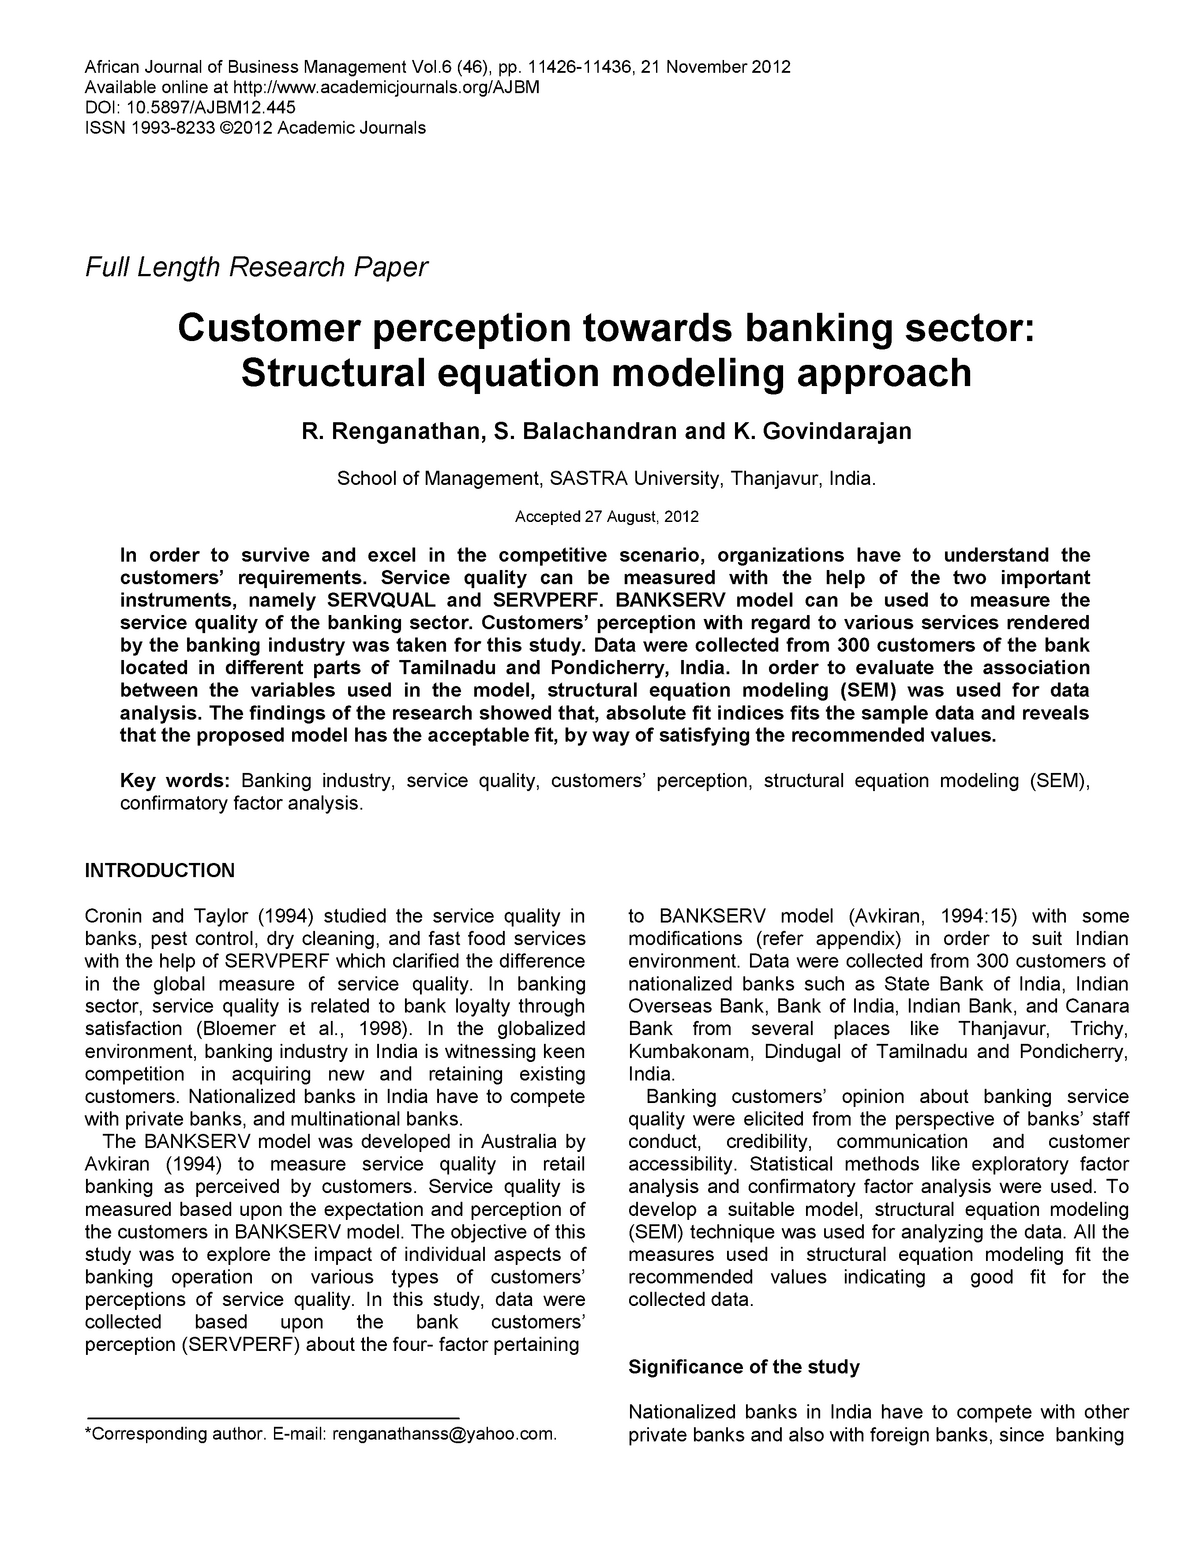 research paper on customer perception towards banking services